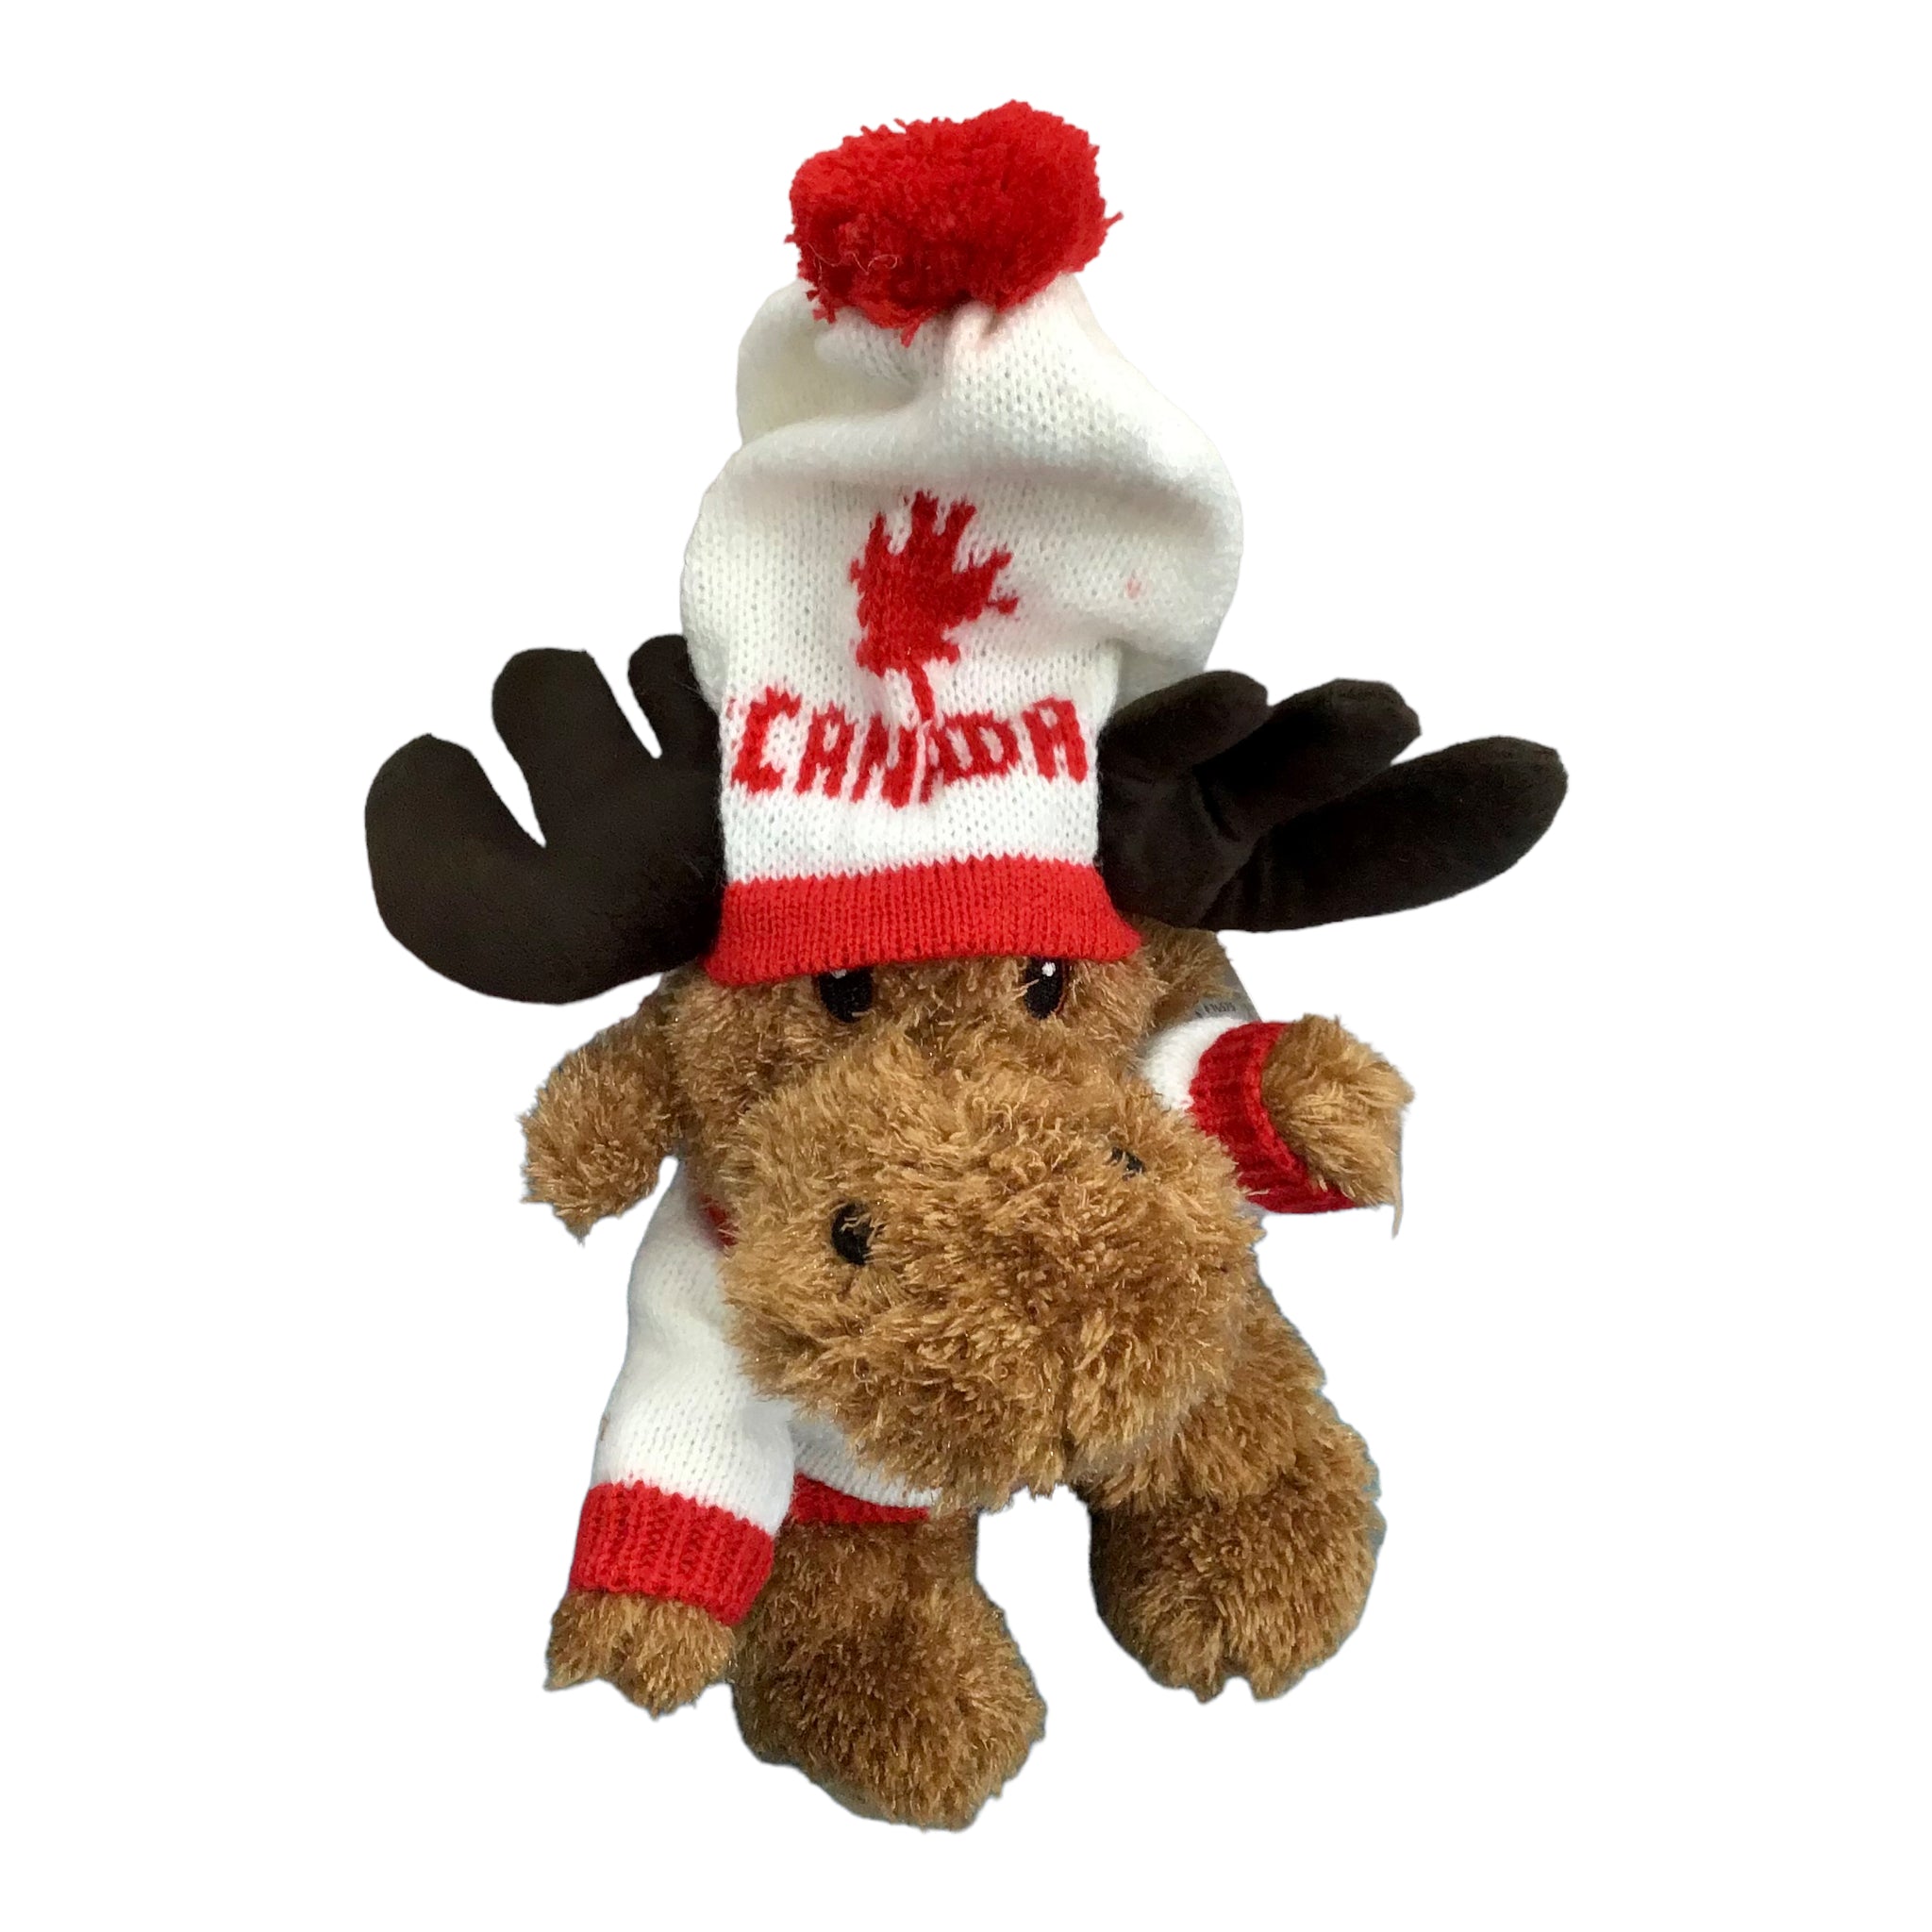 Canadian Moose Stuffed Animal Wearing Sweater and Toque, Canada and Maple Leaf Themed Design Plush Soft Toy